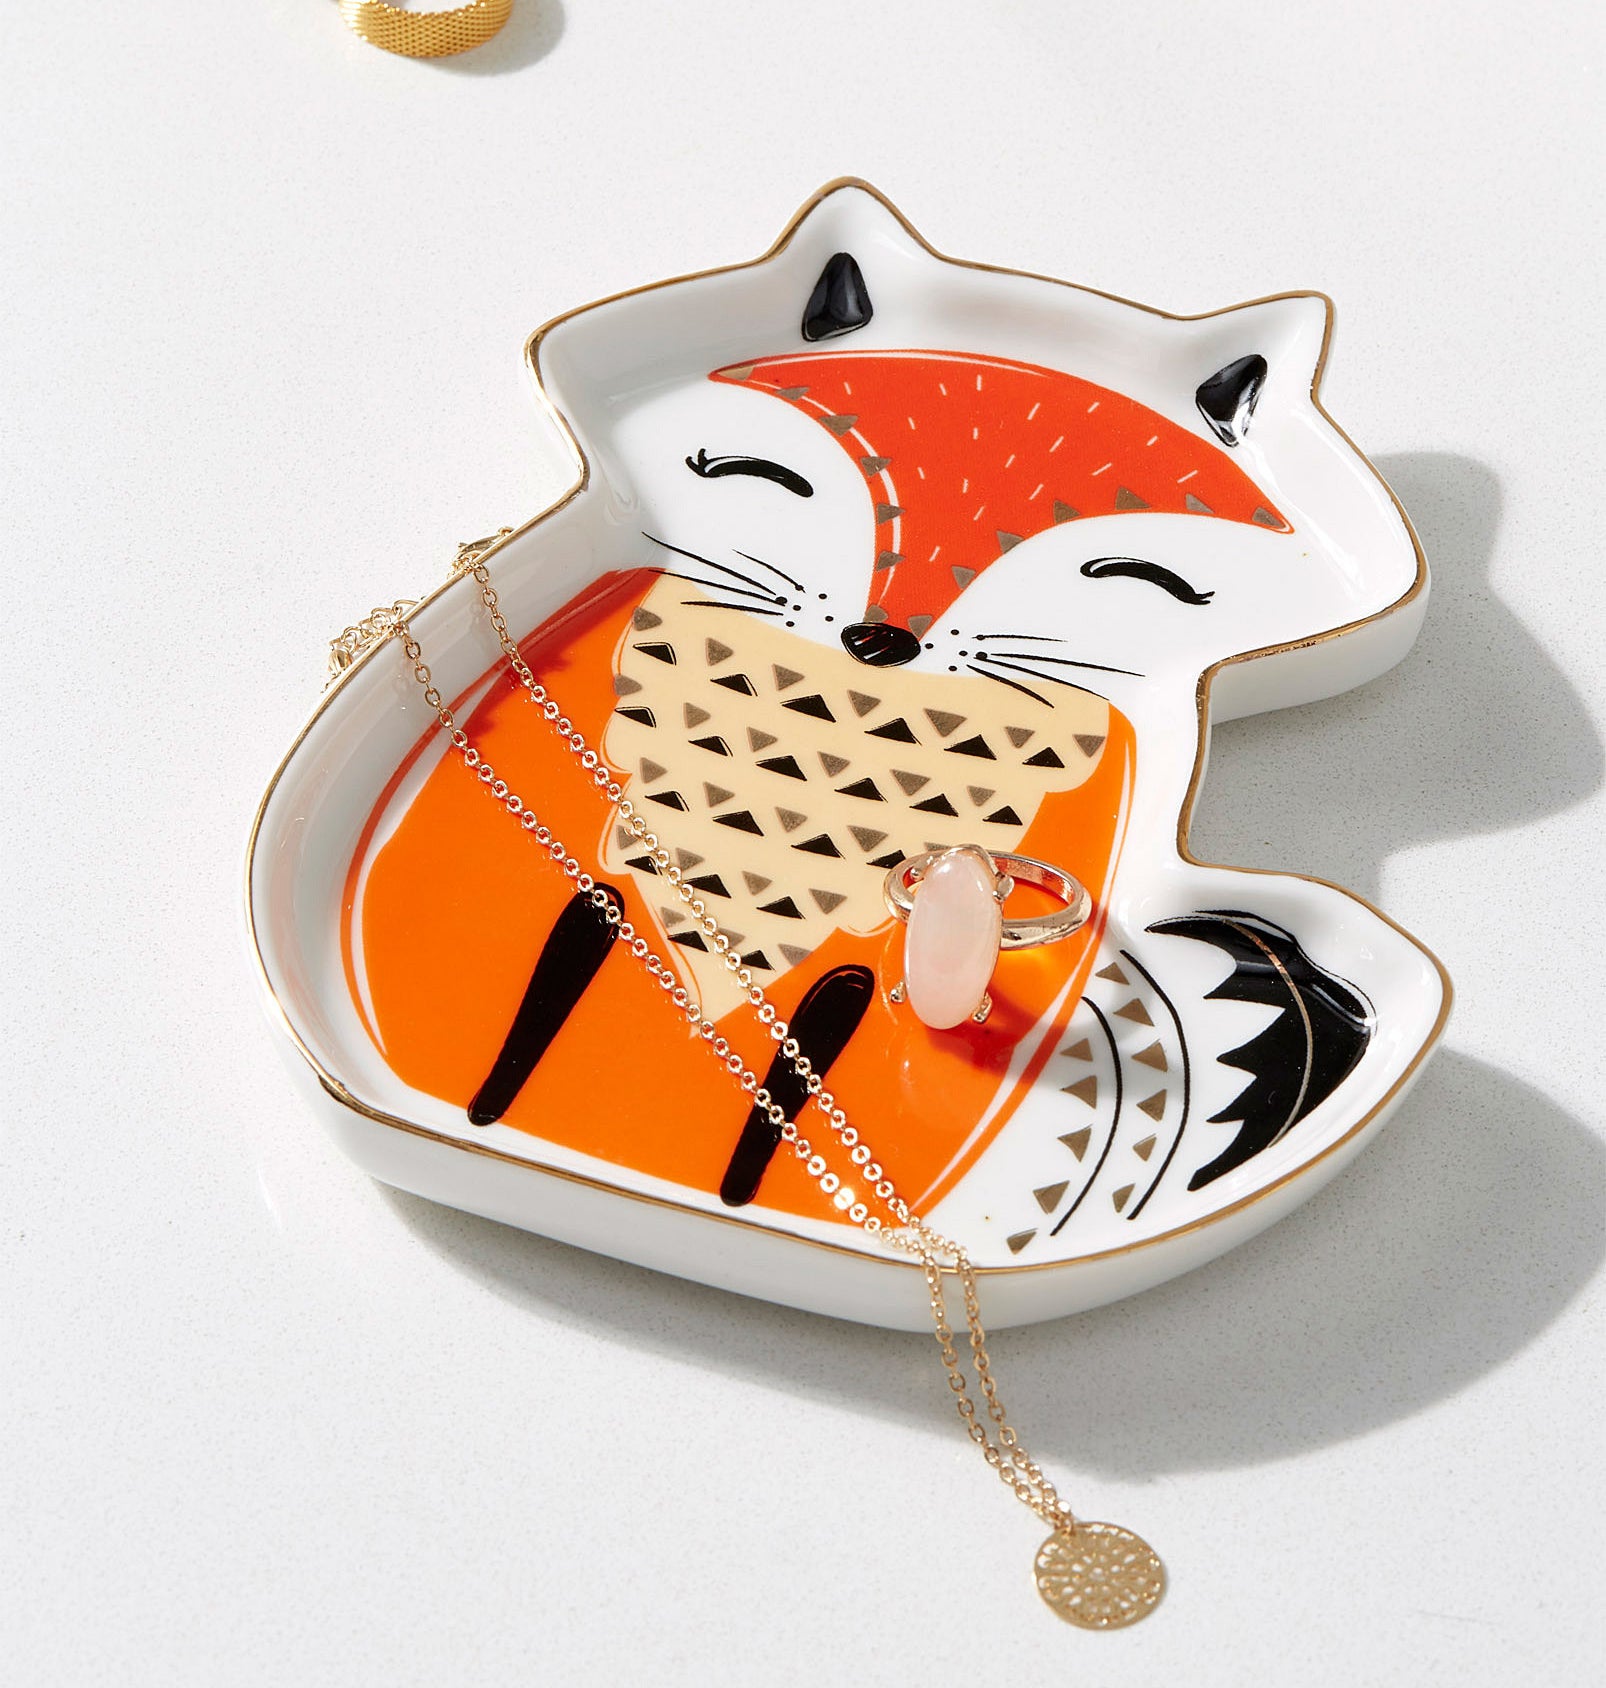 The fox dish with rings and necklaces inside of it